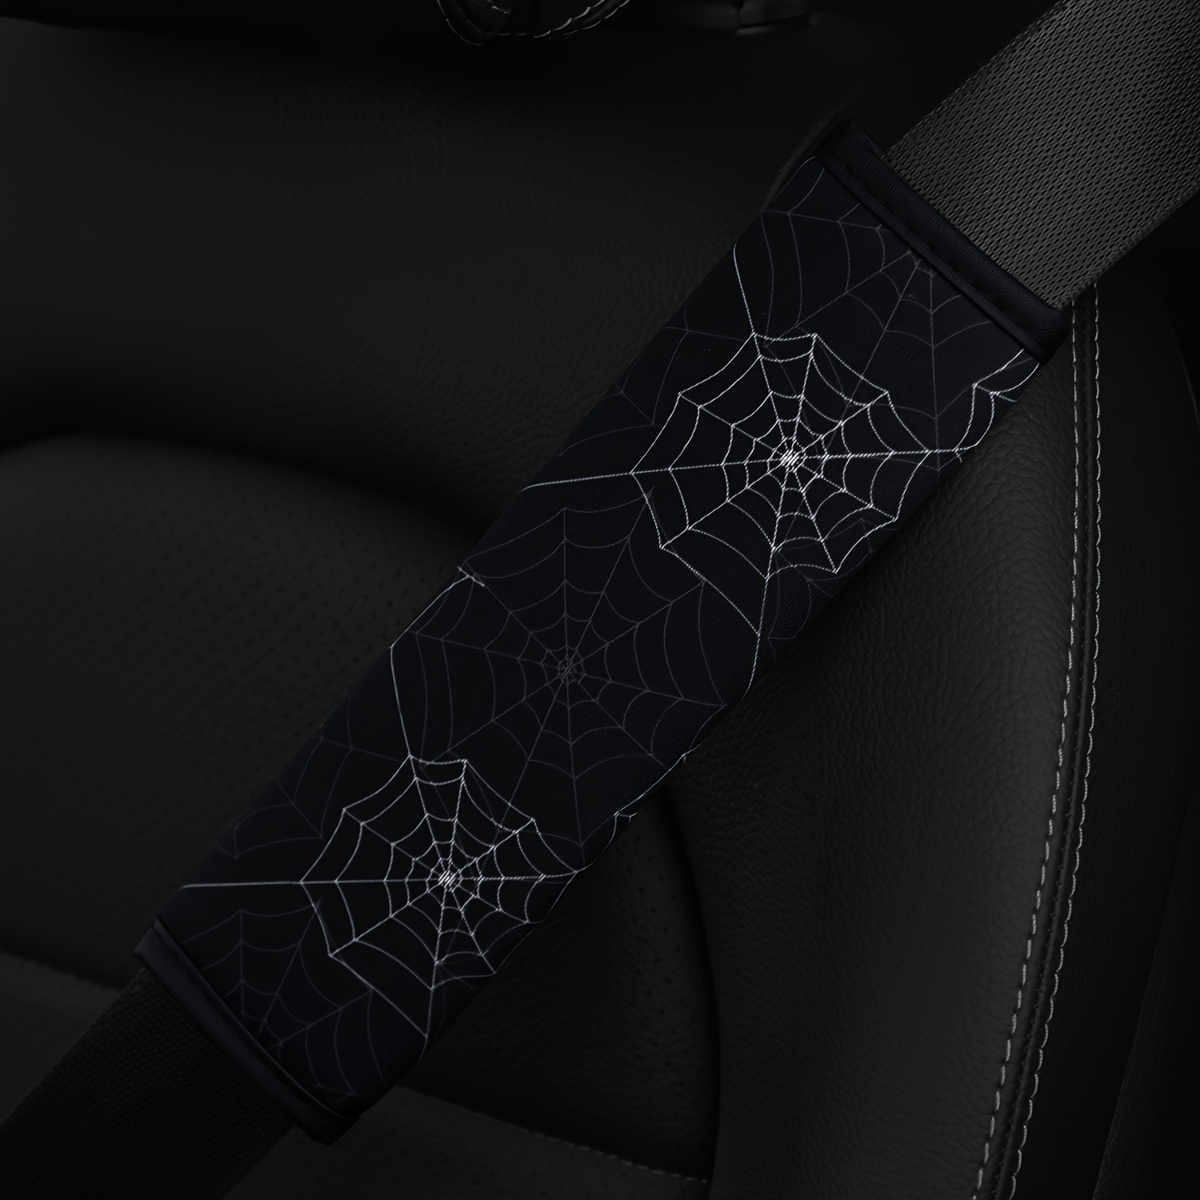 

1pc Spider Web Spider Print Fabric Car Seat Belt Shoulder Protector Cover Insurance Belt Cover Single Pack Car Accessories